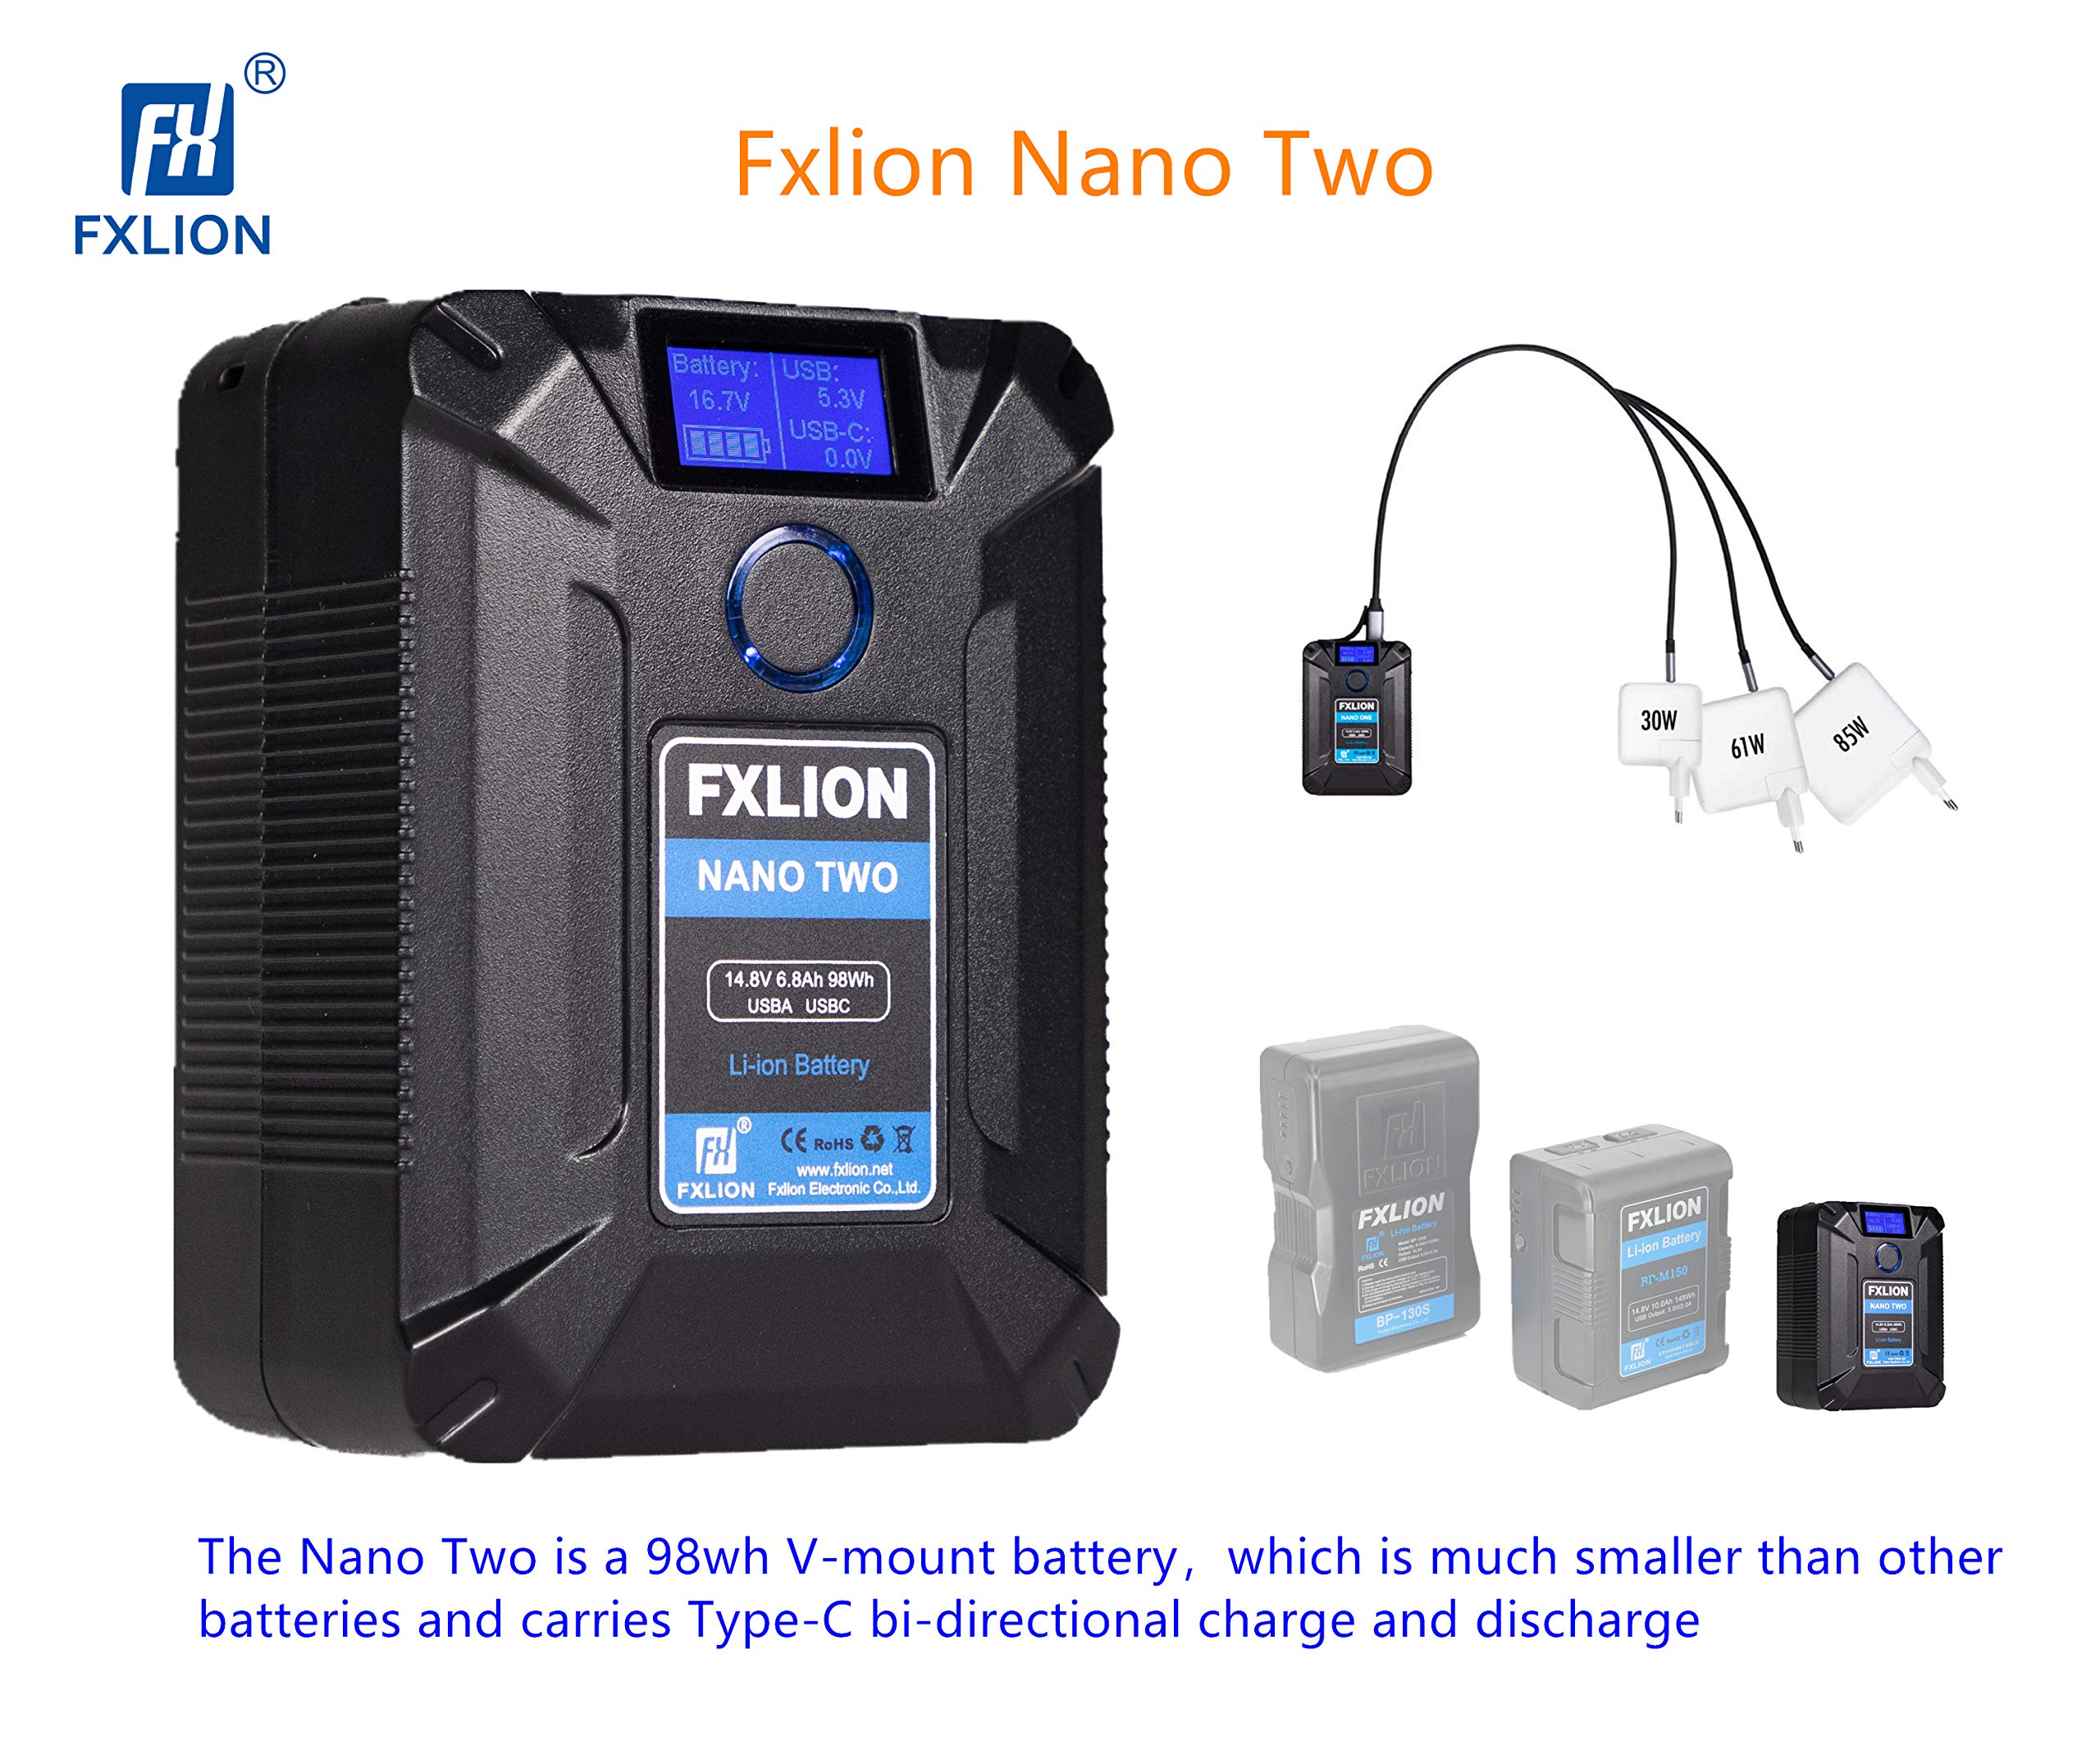 SONGING FXLION Nano Two 98WH Tiny V-Mount/V-Lock Battery with Type-C, D-tap, USB A, Micro USB for Cameras, Camcorders,Large LED Lights, Monitors, MacBook and Smartphone